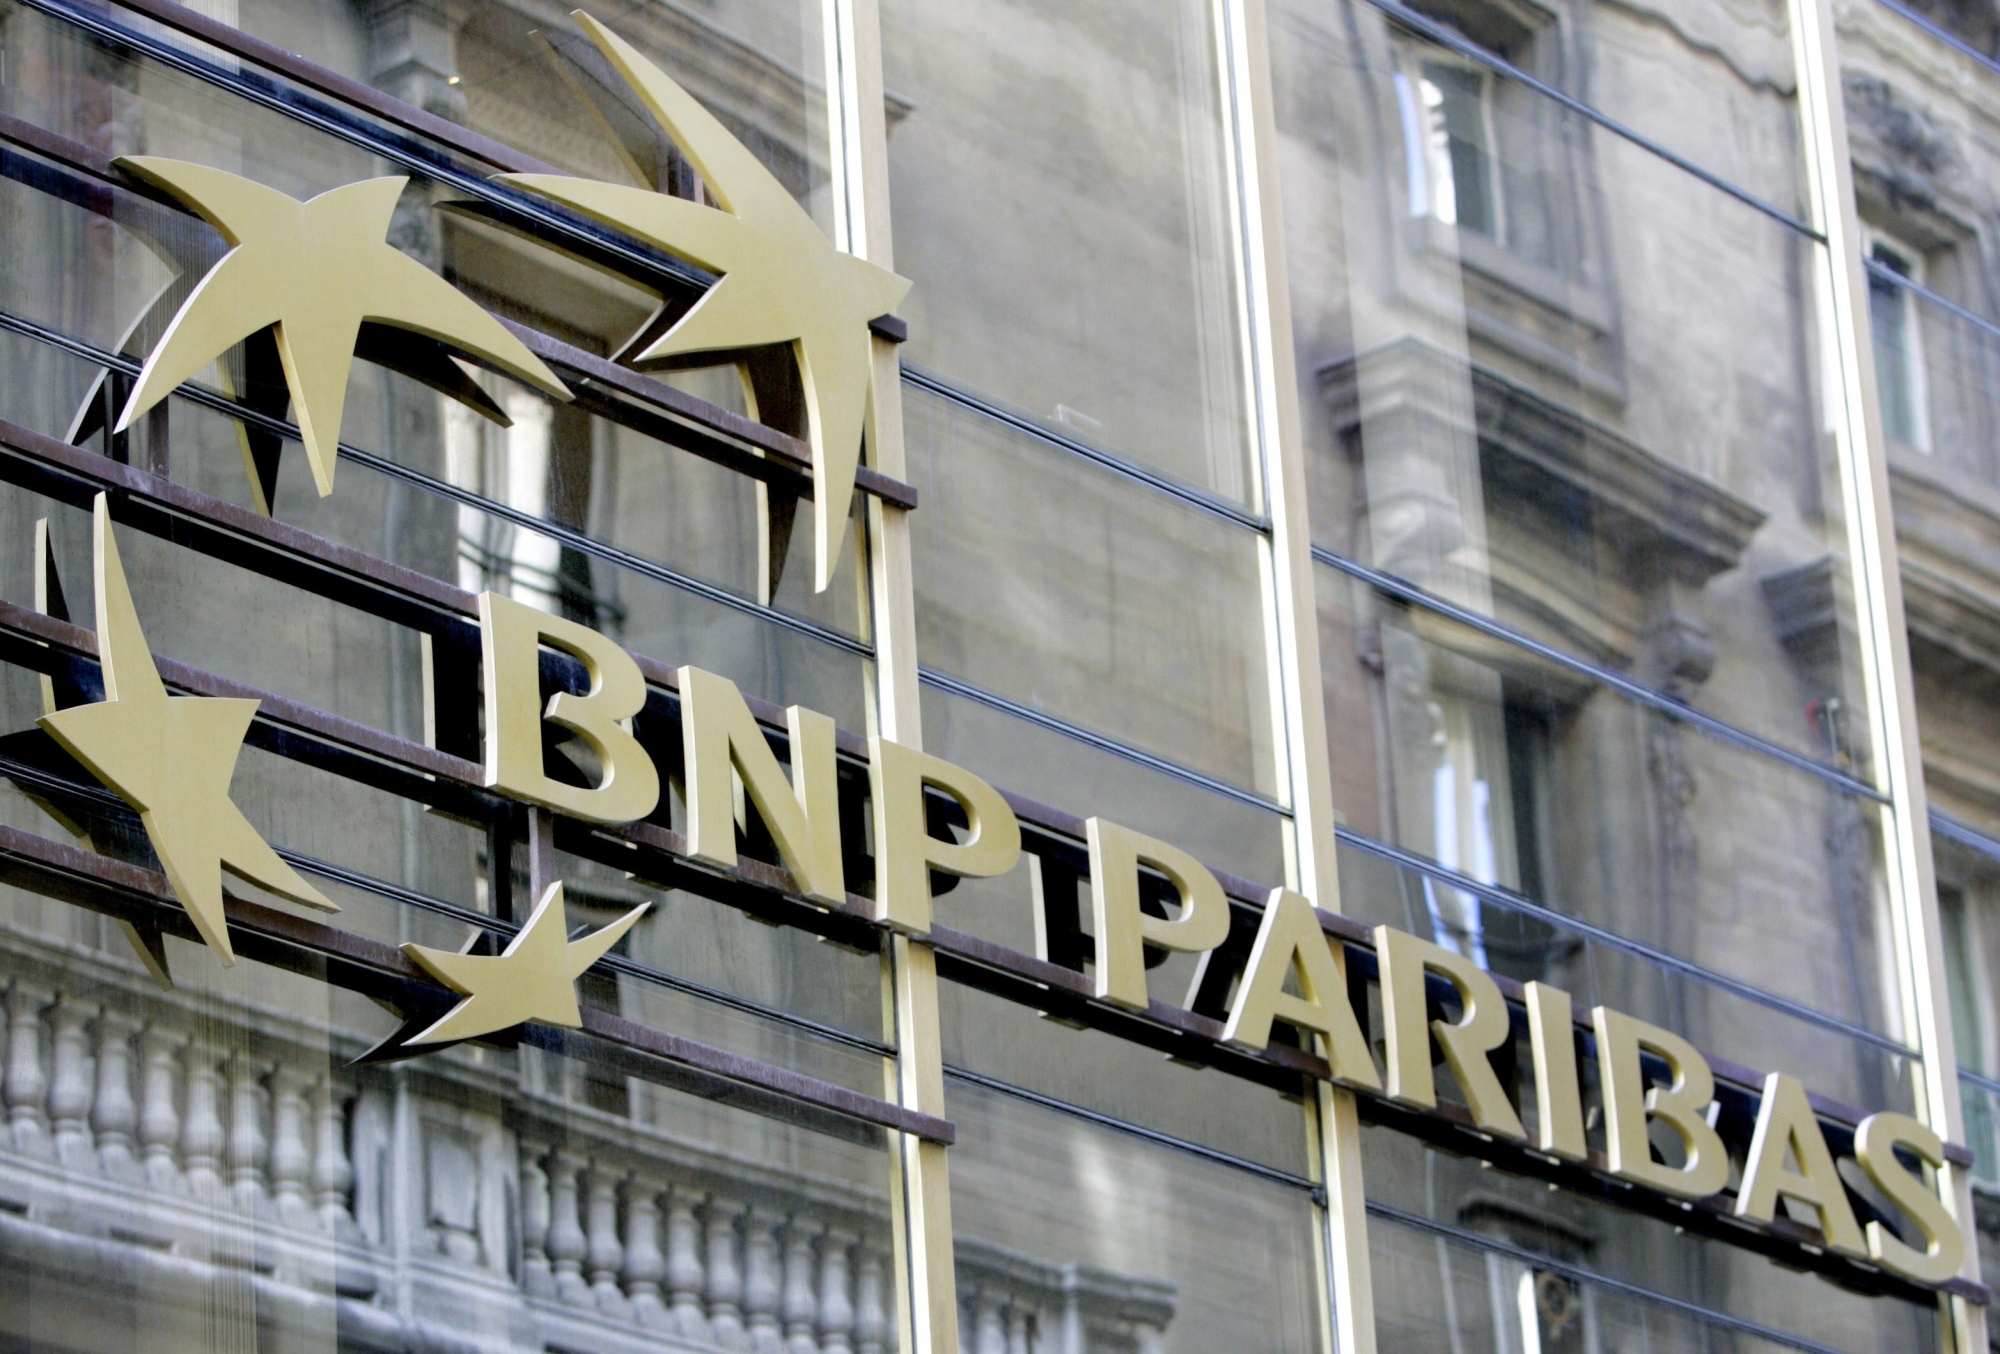 In this March 9, 2009 photo, the BNP Paribas logo is seen at the headquarters of the French bank, in Paris. BNP Paribas SA said Tuesday Sept.29, 2009 that it has launched a euro 4.3 billion ($6.3 billion) rights issue to help repay the emergency funding it received from the French government. (AP Photo/Remy de la Mauviniere) FRANKREICH BANK BNP PARIBAS